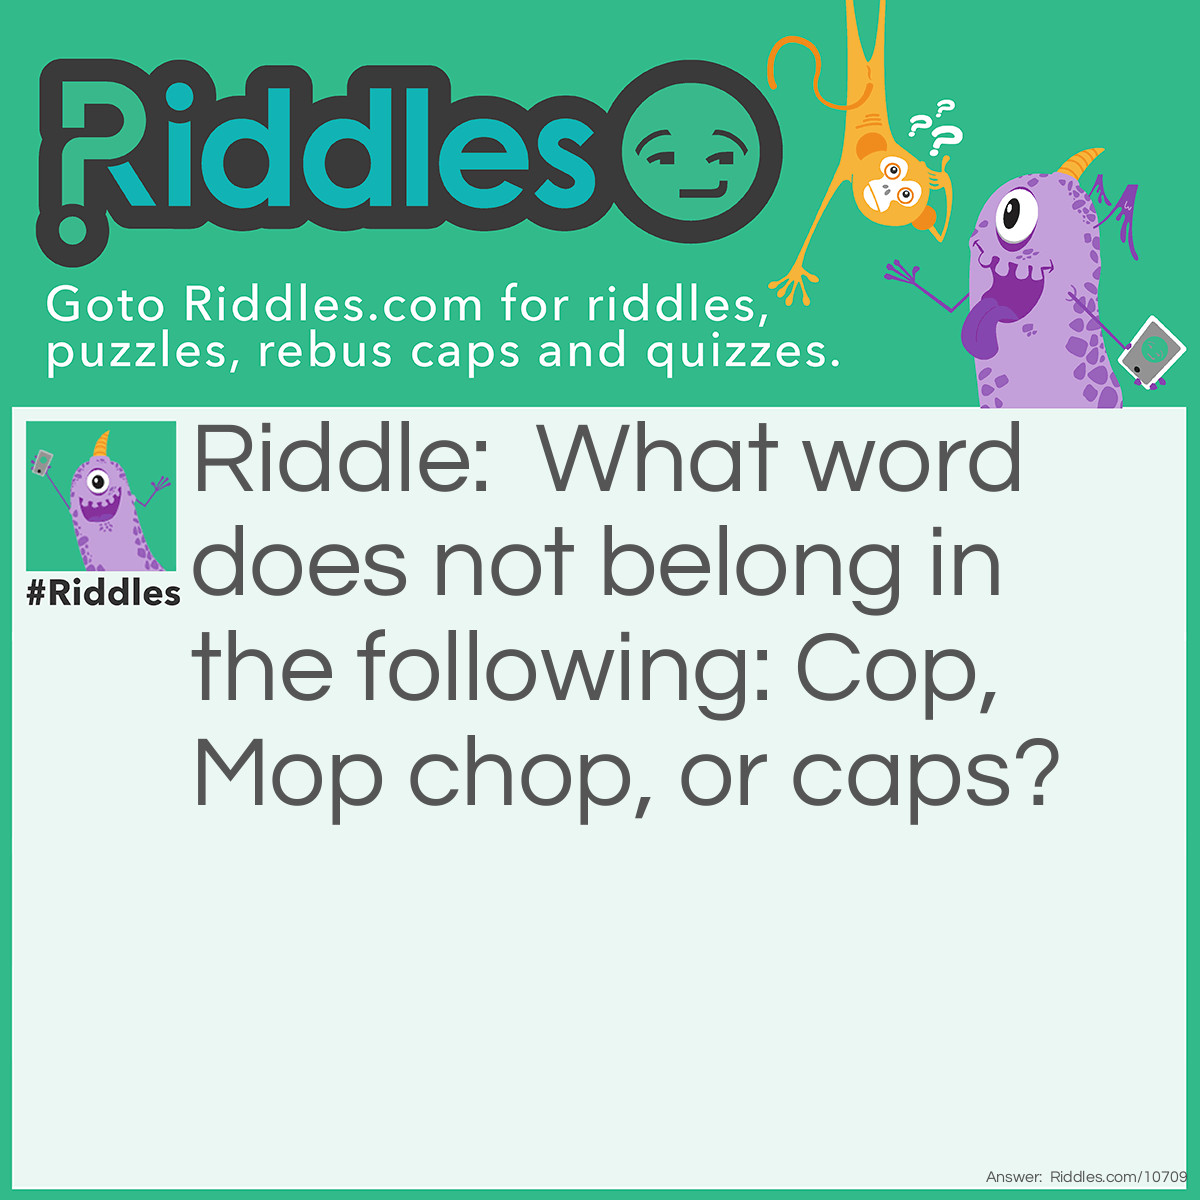 Riddle: What word does not belong in the following: Cop, Mop chop, or caps? Answer: Or!